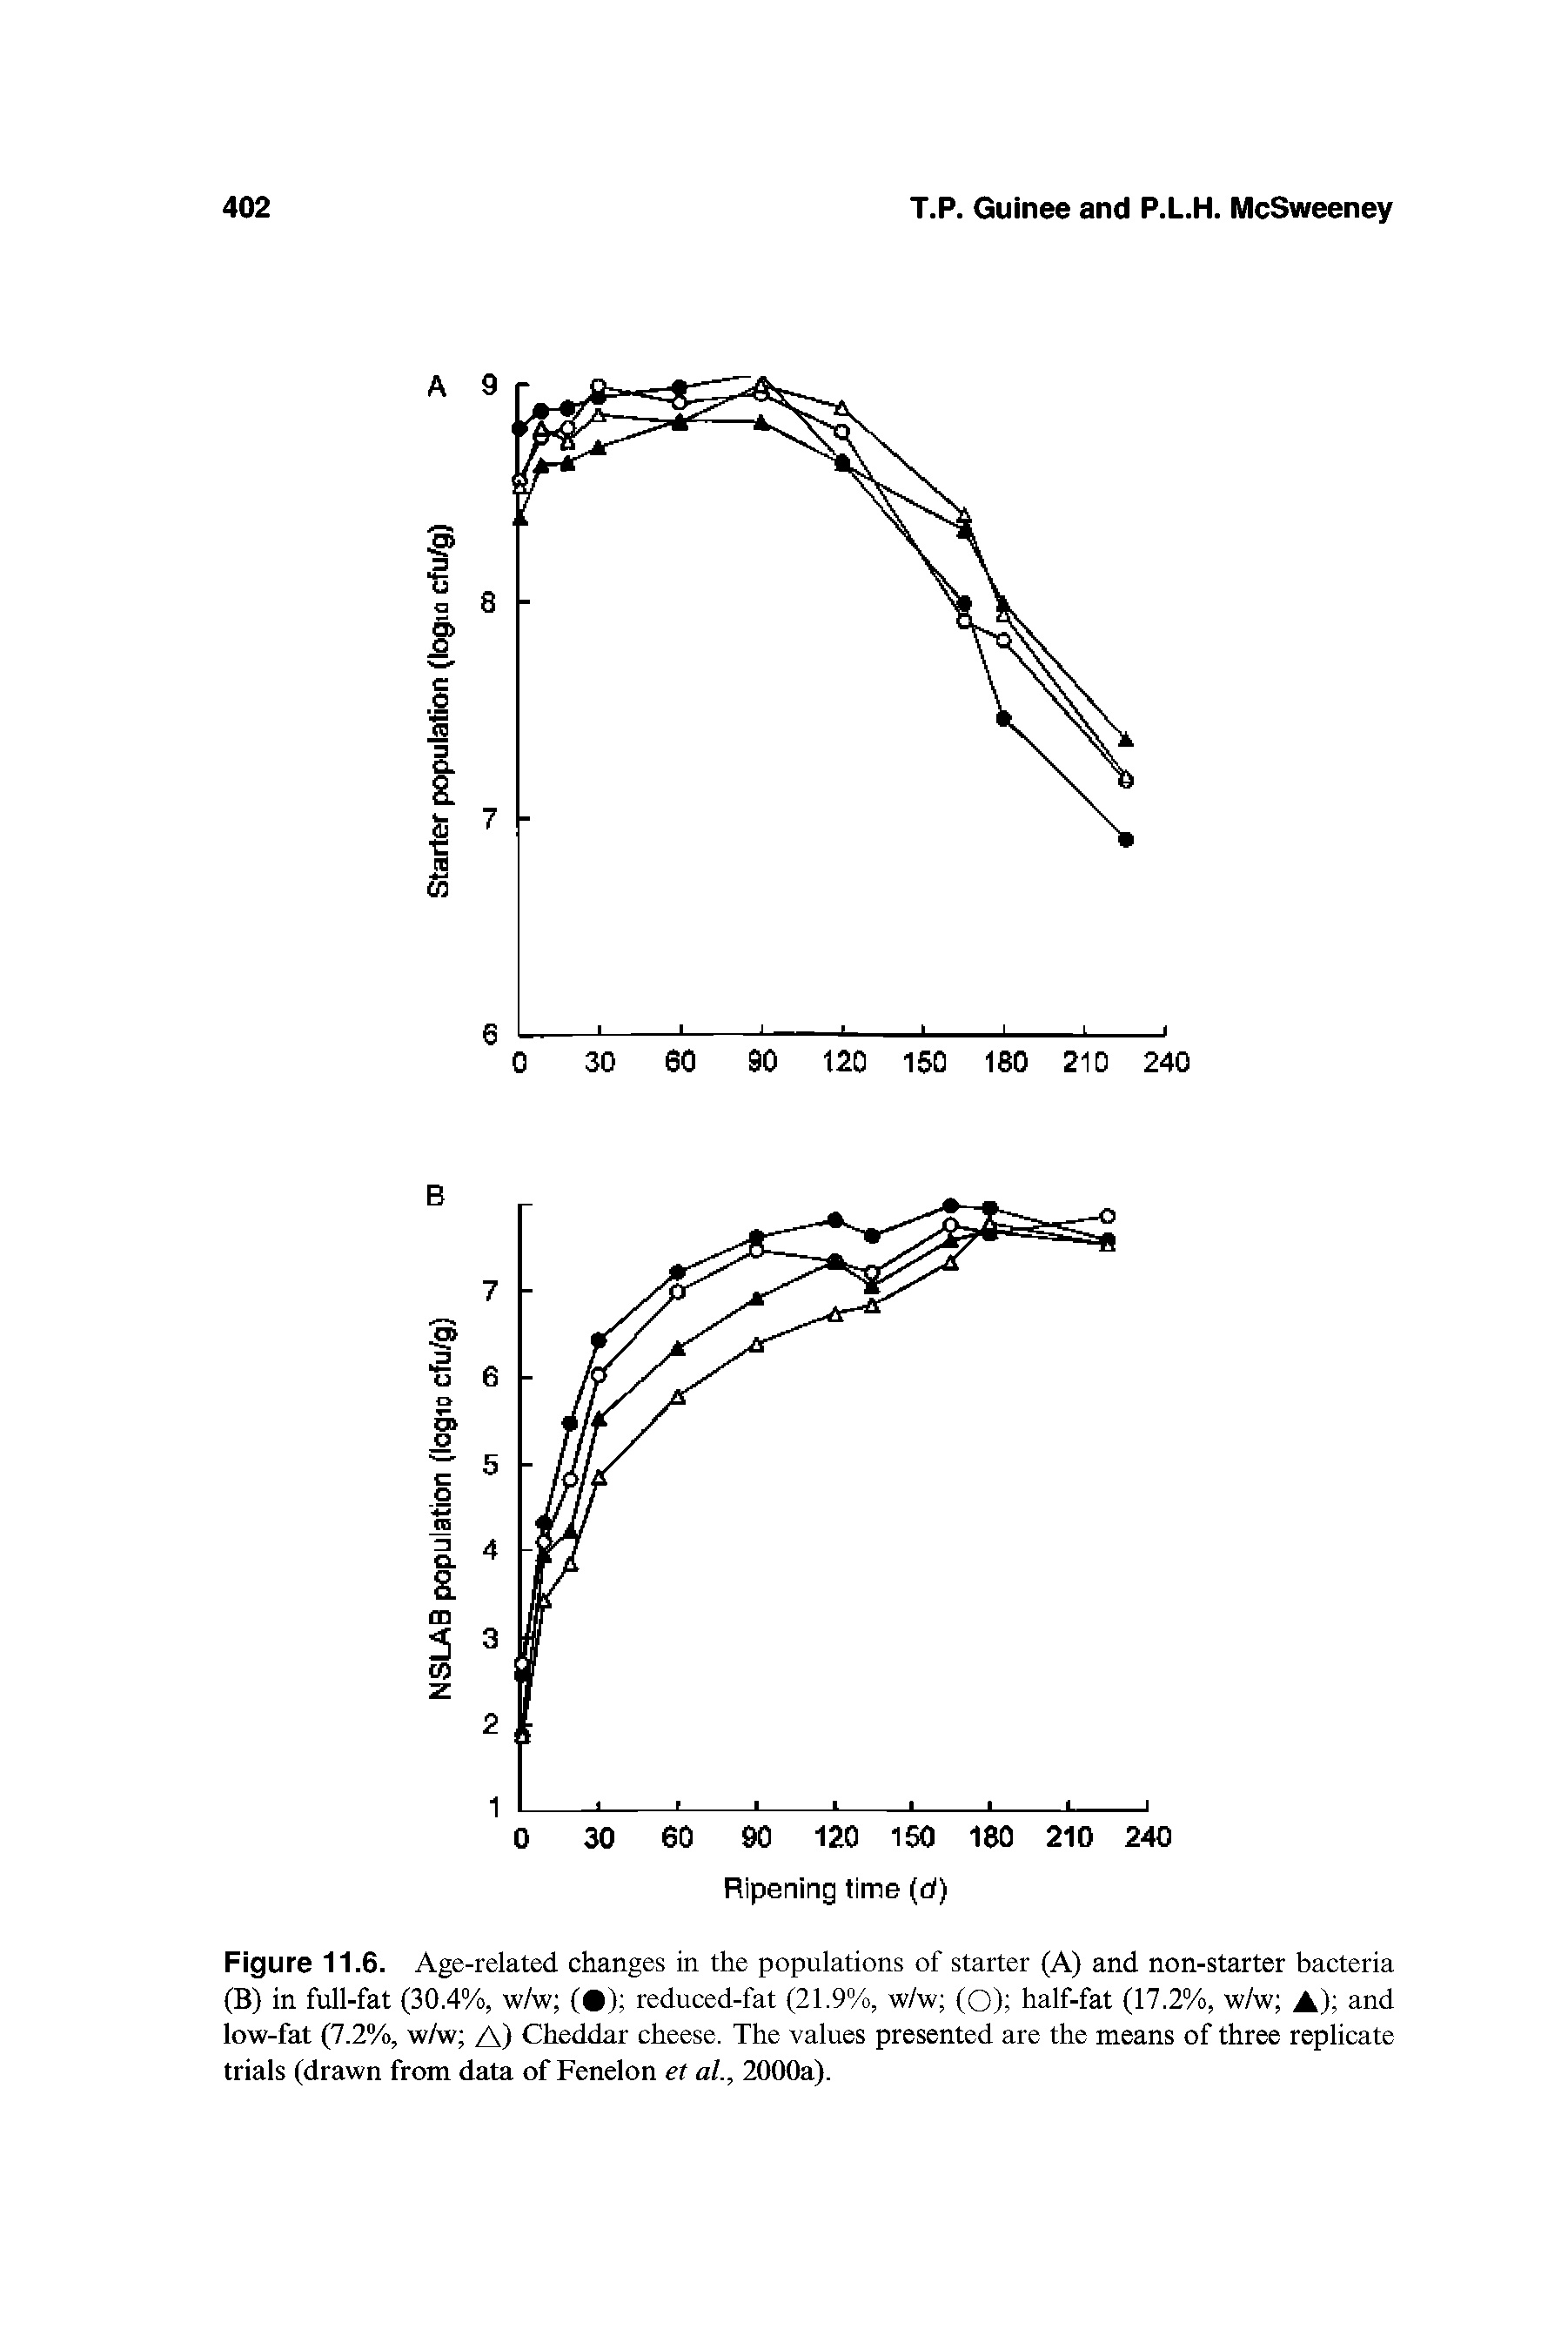 Figure 11.6. Age-related changes in the populations of starter (A) and non-starter bacteria (B) in full-fat (30.4%, w/w ( ) reduced-fat (21.9%, w/w (O) half-fat (17.2%, w/w A) and low-fat (7.2%, w/w A) Cheddar cheese. The values presented are the means of three replicate trials (drawn from data of Fenelon el al., 2000a).